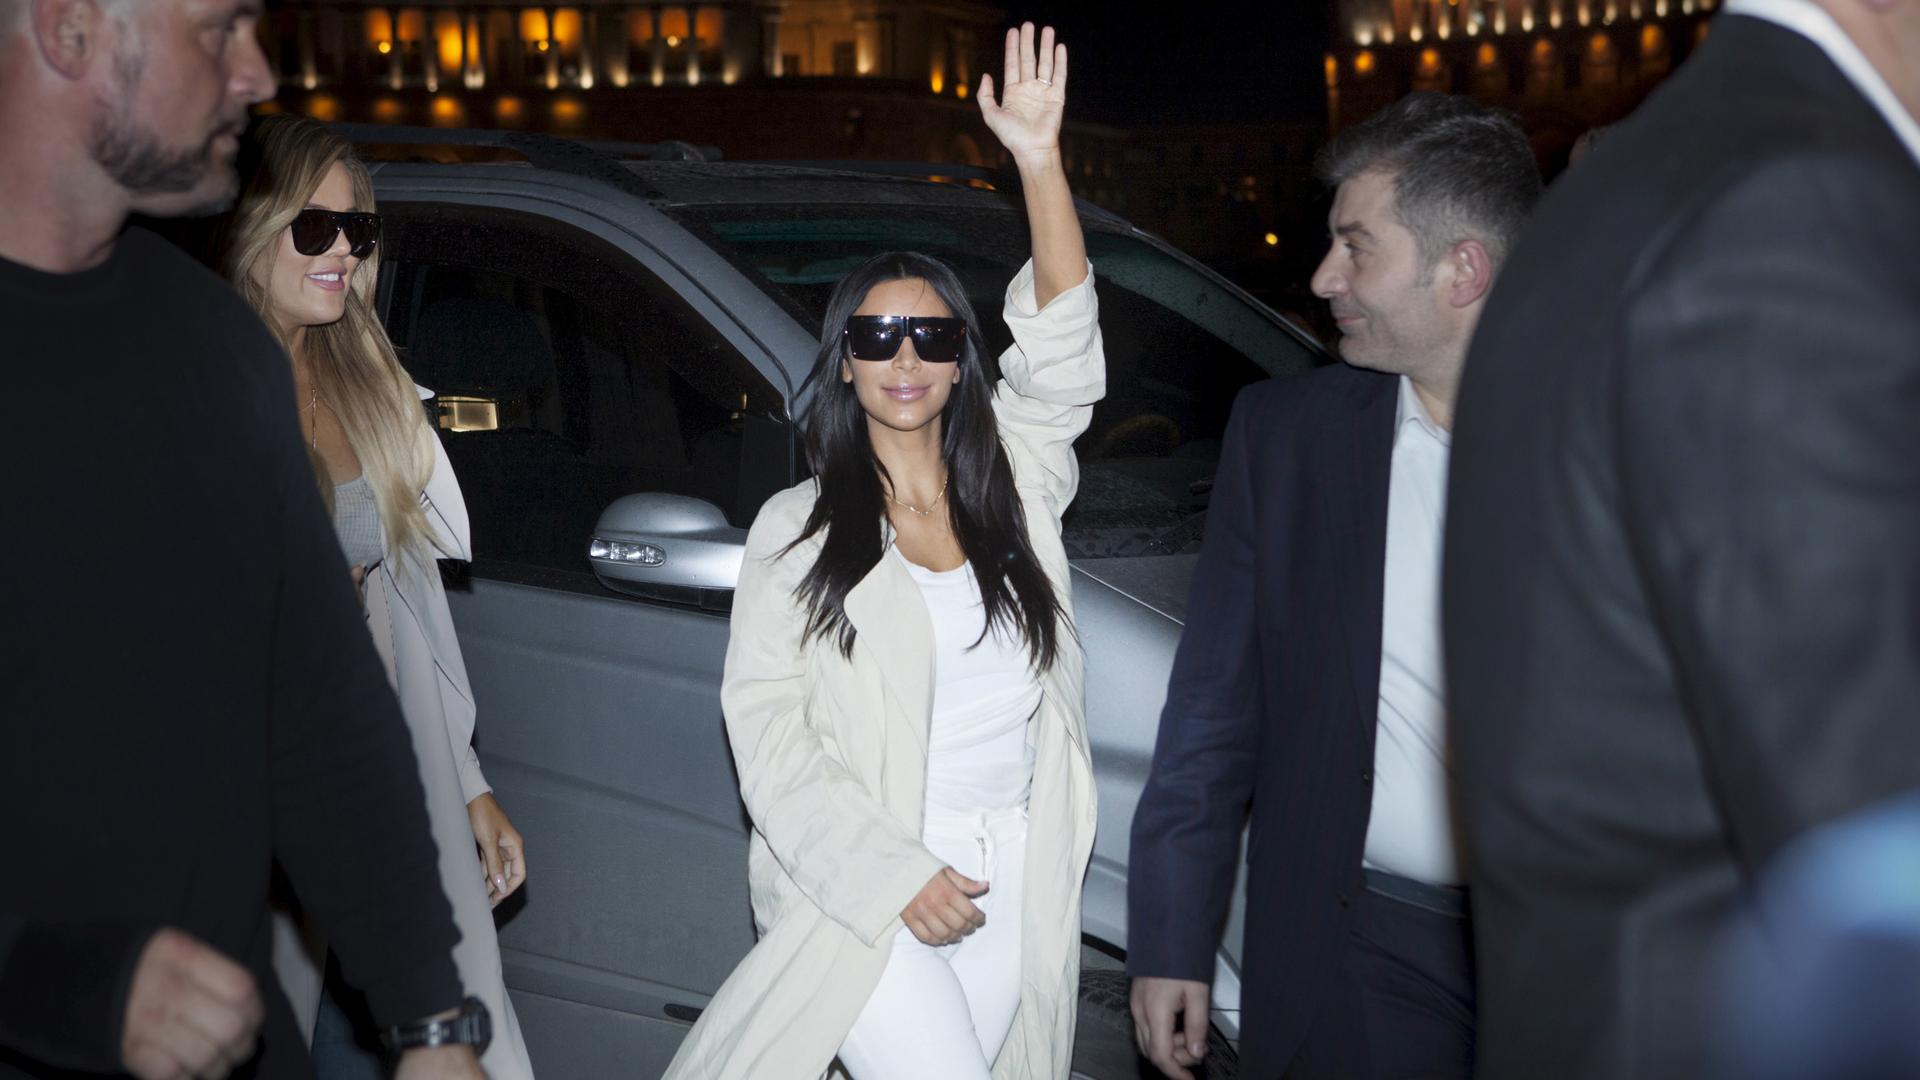 TV celebrity Kim Kardashian gestures on her way to a hotel shortly after arriving in Yerevan, Armenia, on April 8, 2015.